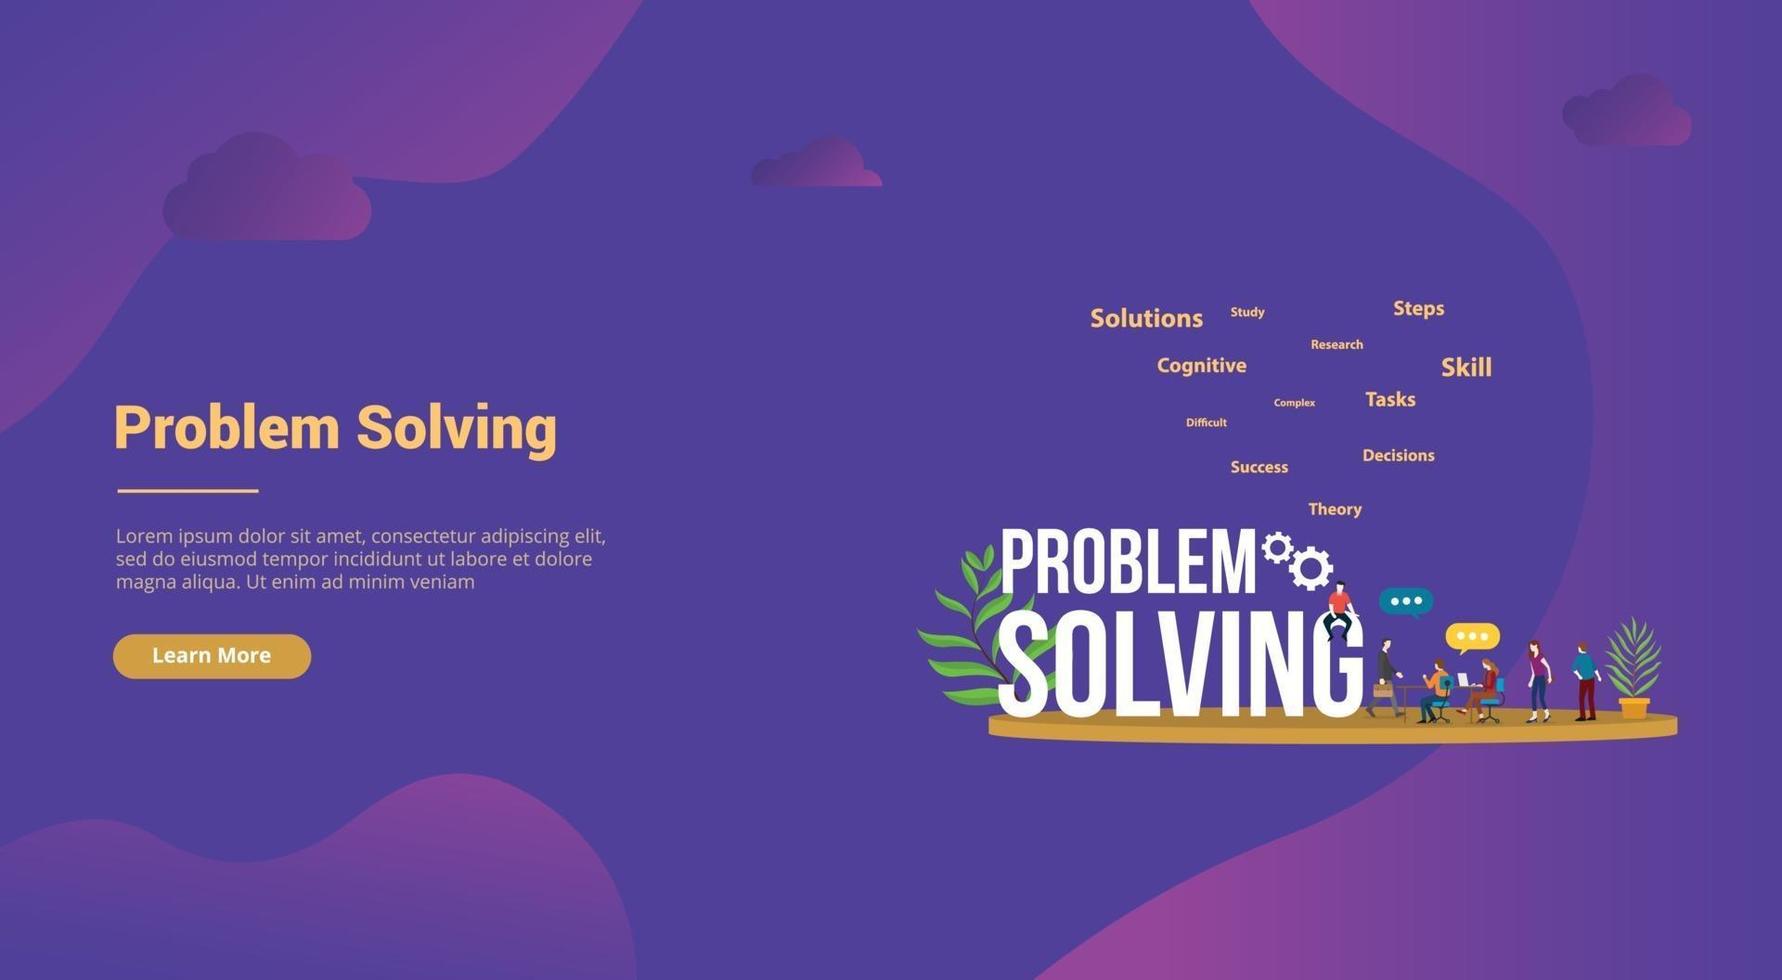 problem solving business concept with big word text and team people vector